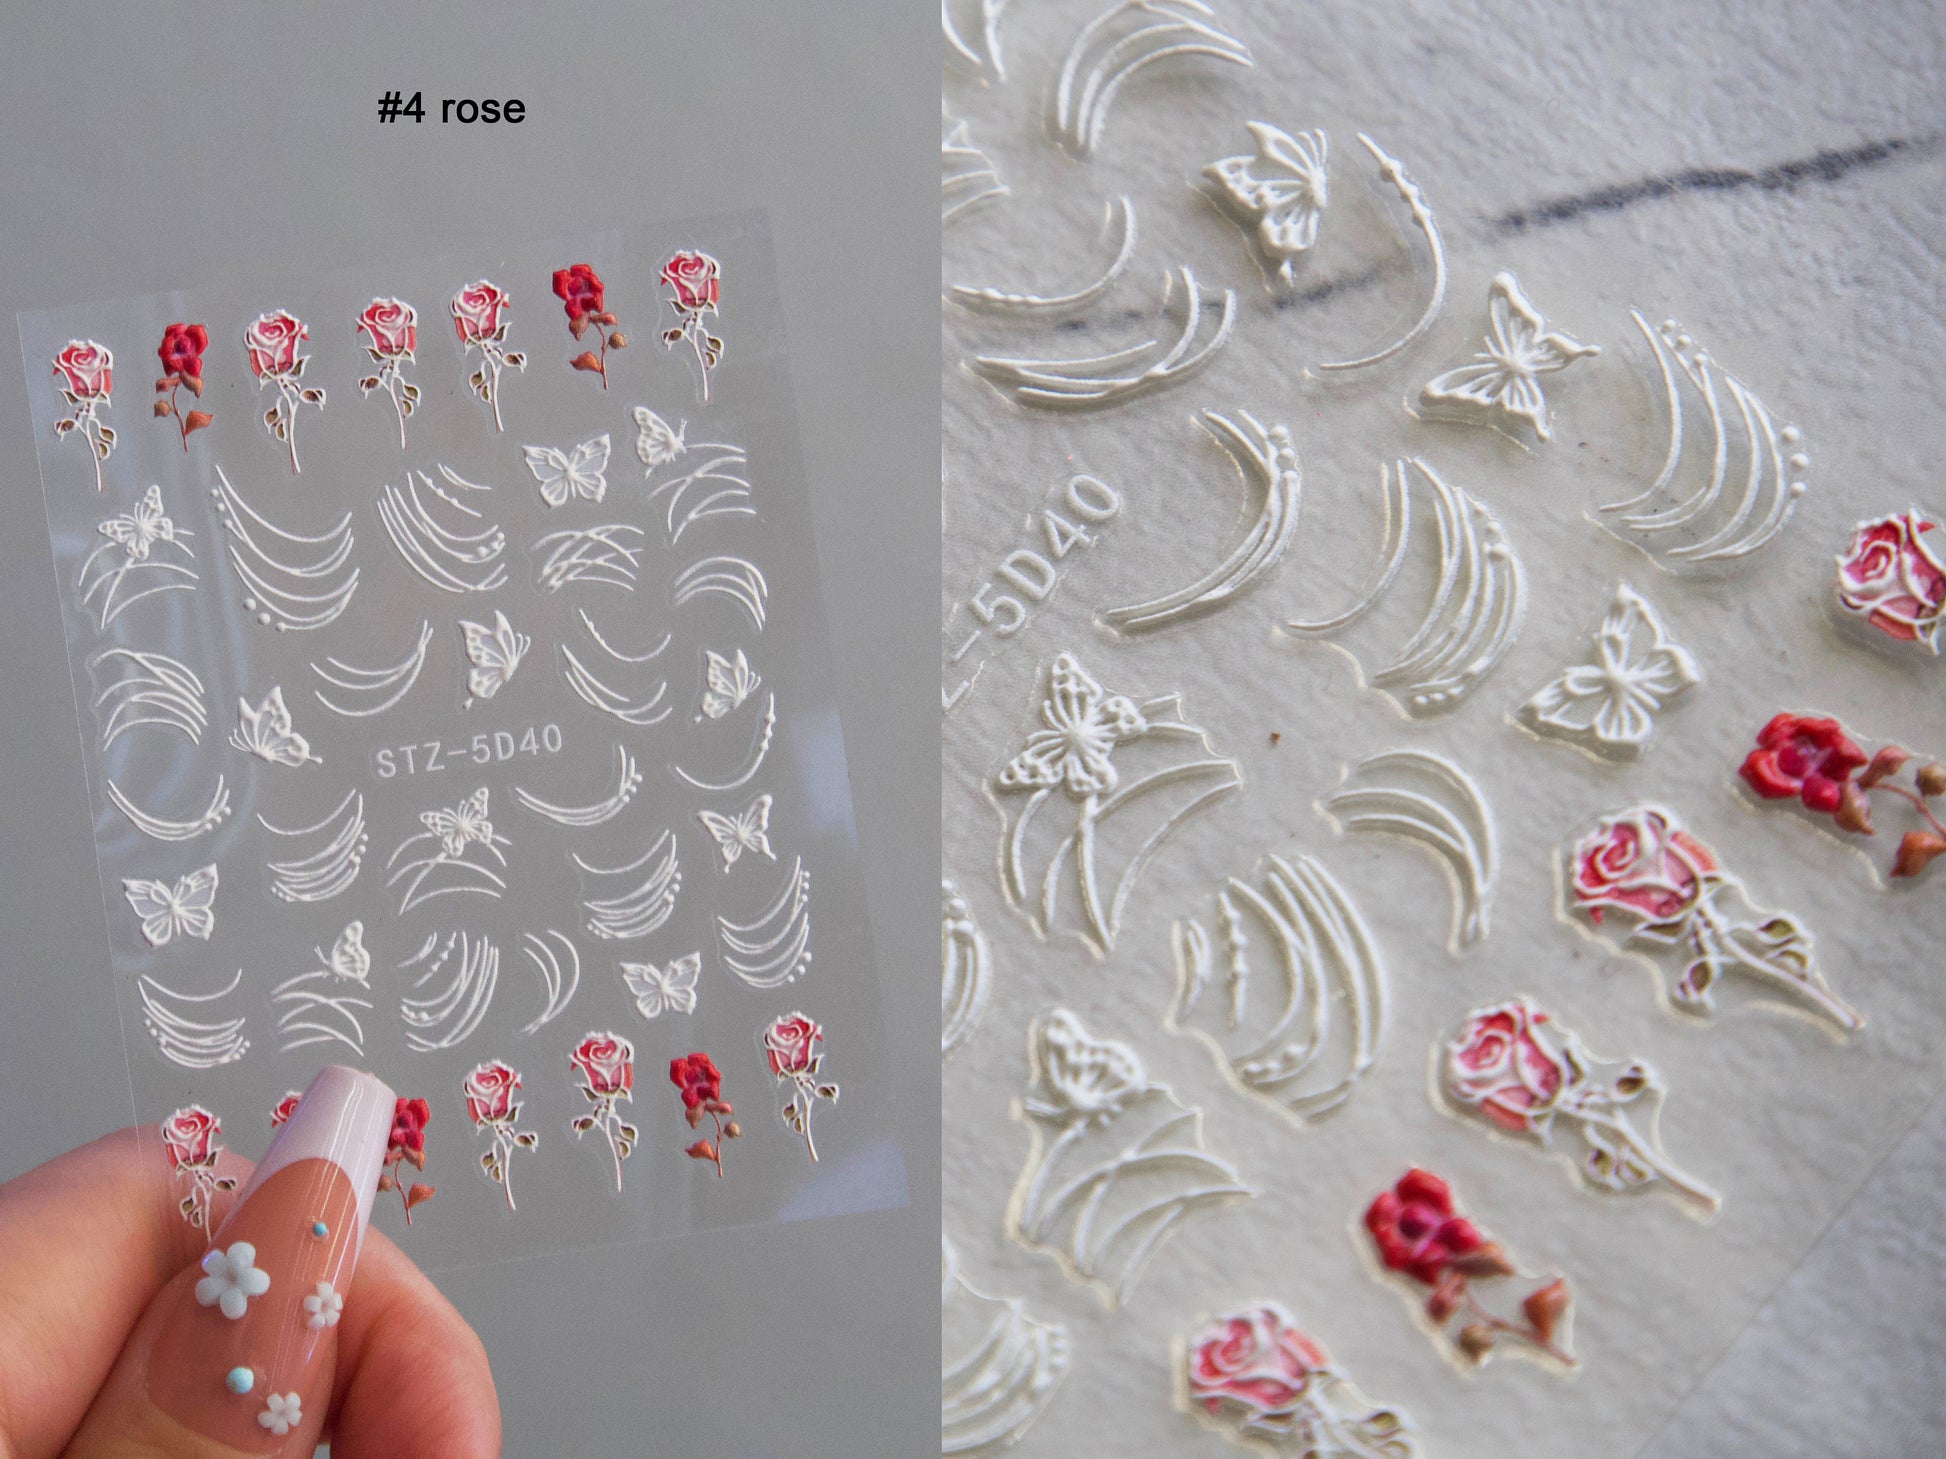 5D Flower Series Embossed nail sticker/Peel off 3D Floral Nail adhesive/ Rose Sakura Lace Lily Better no Hand painted Easy Nail art